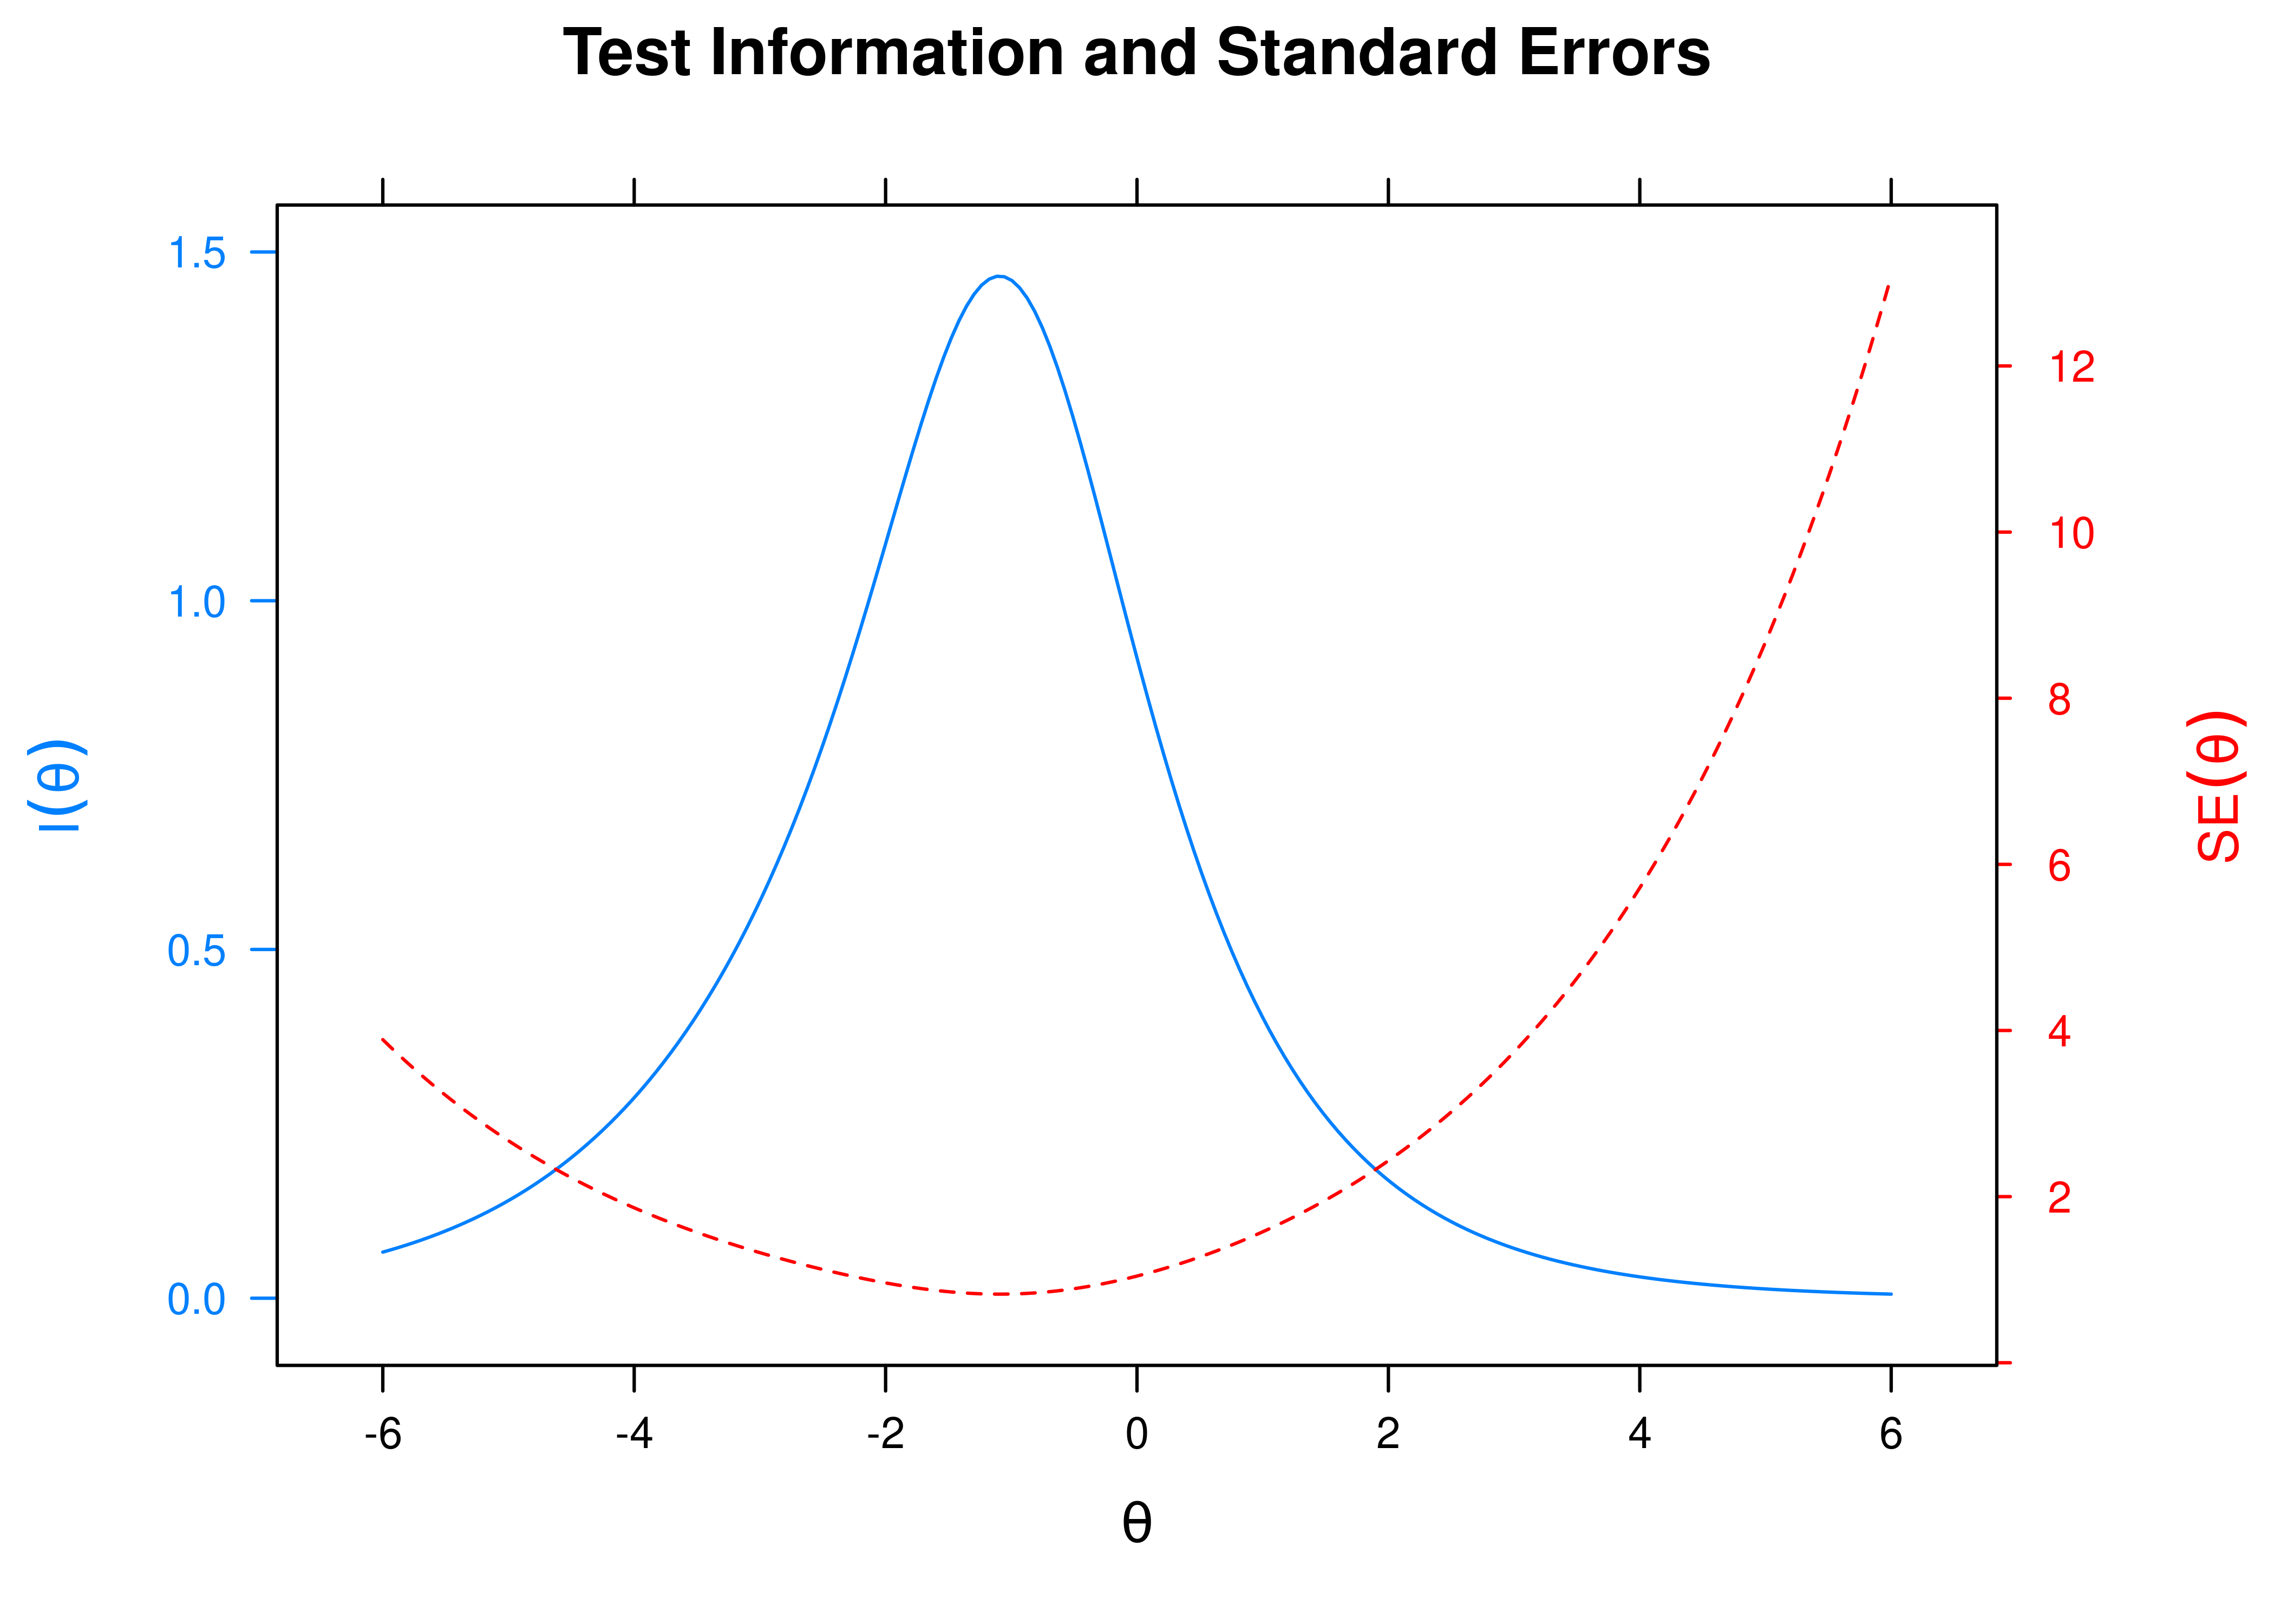 Test Information Curve and Standard Error of Measurement From Two-Parameter Logistic Item Response Theory Model.